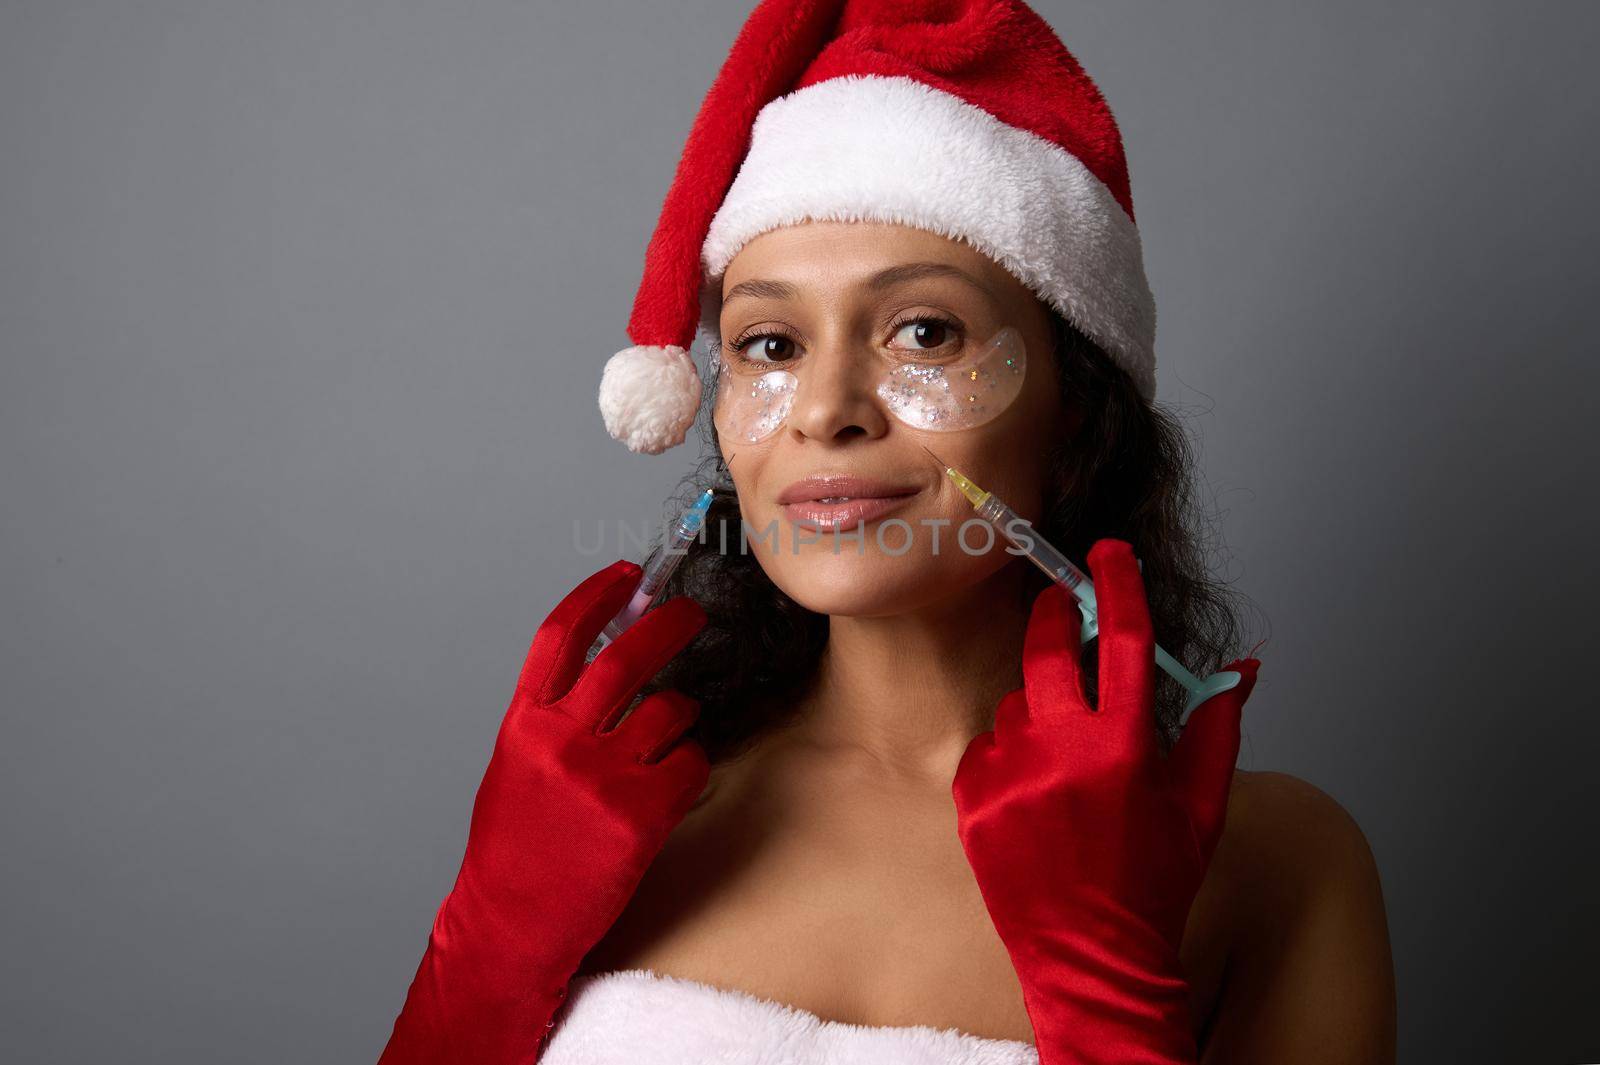 Beautiful woman dressed in Santa for Christmas holidays, holds syringes near her face, ready for beauty injections on her nasolabial folds. Anti-aging, face lifting and rejuvenation concept for ad by artgf